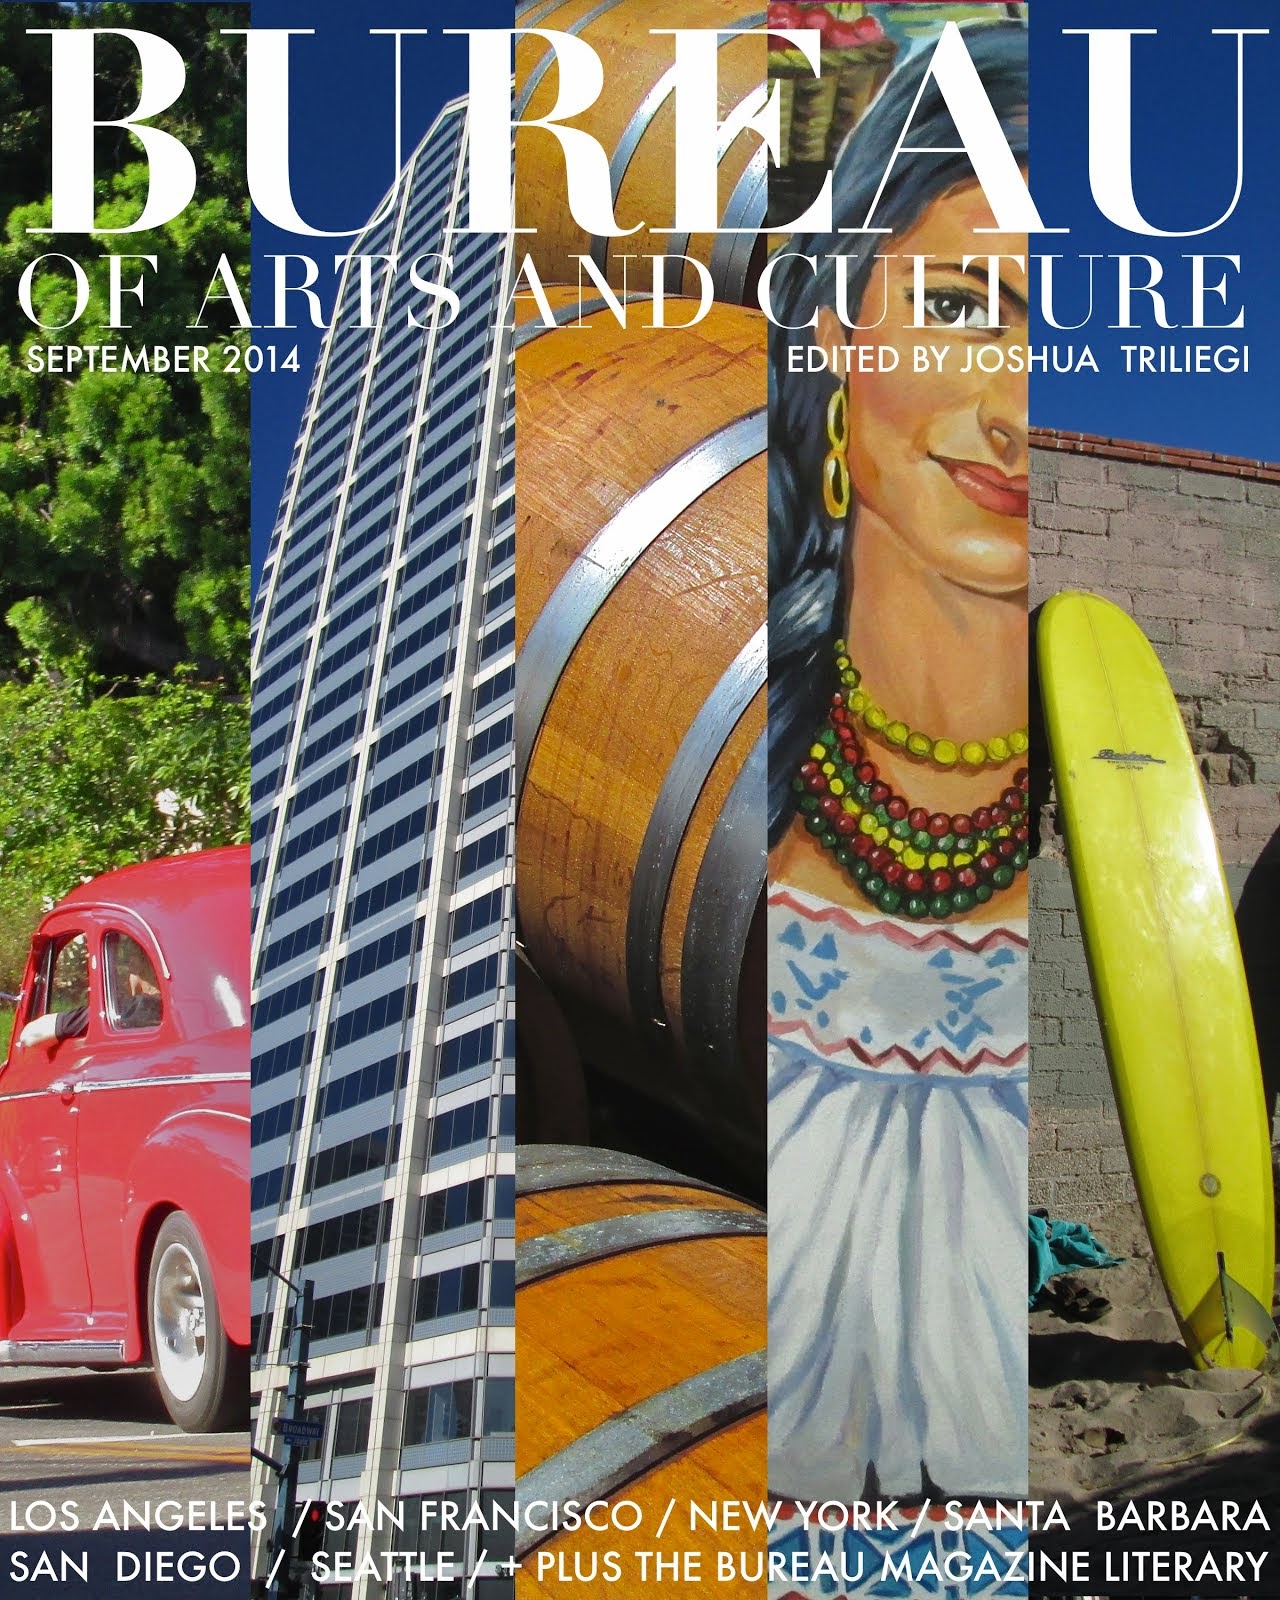 September 2014 Edition of BUREAU of ARTS and CULTURE MAGAZINE